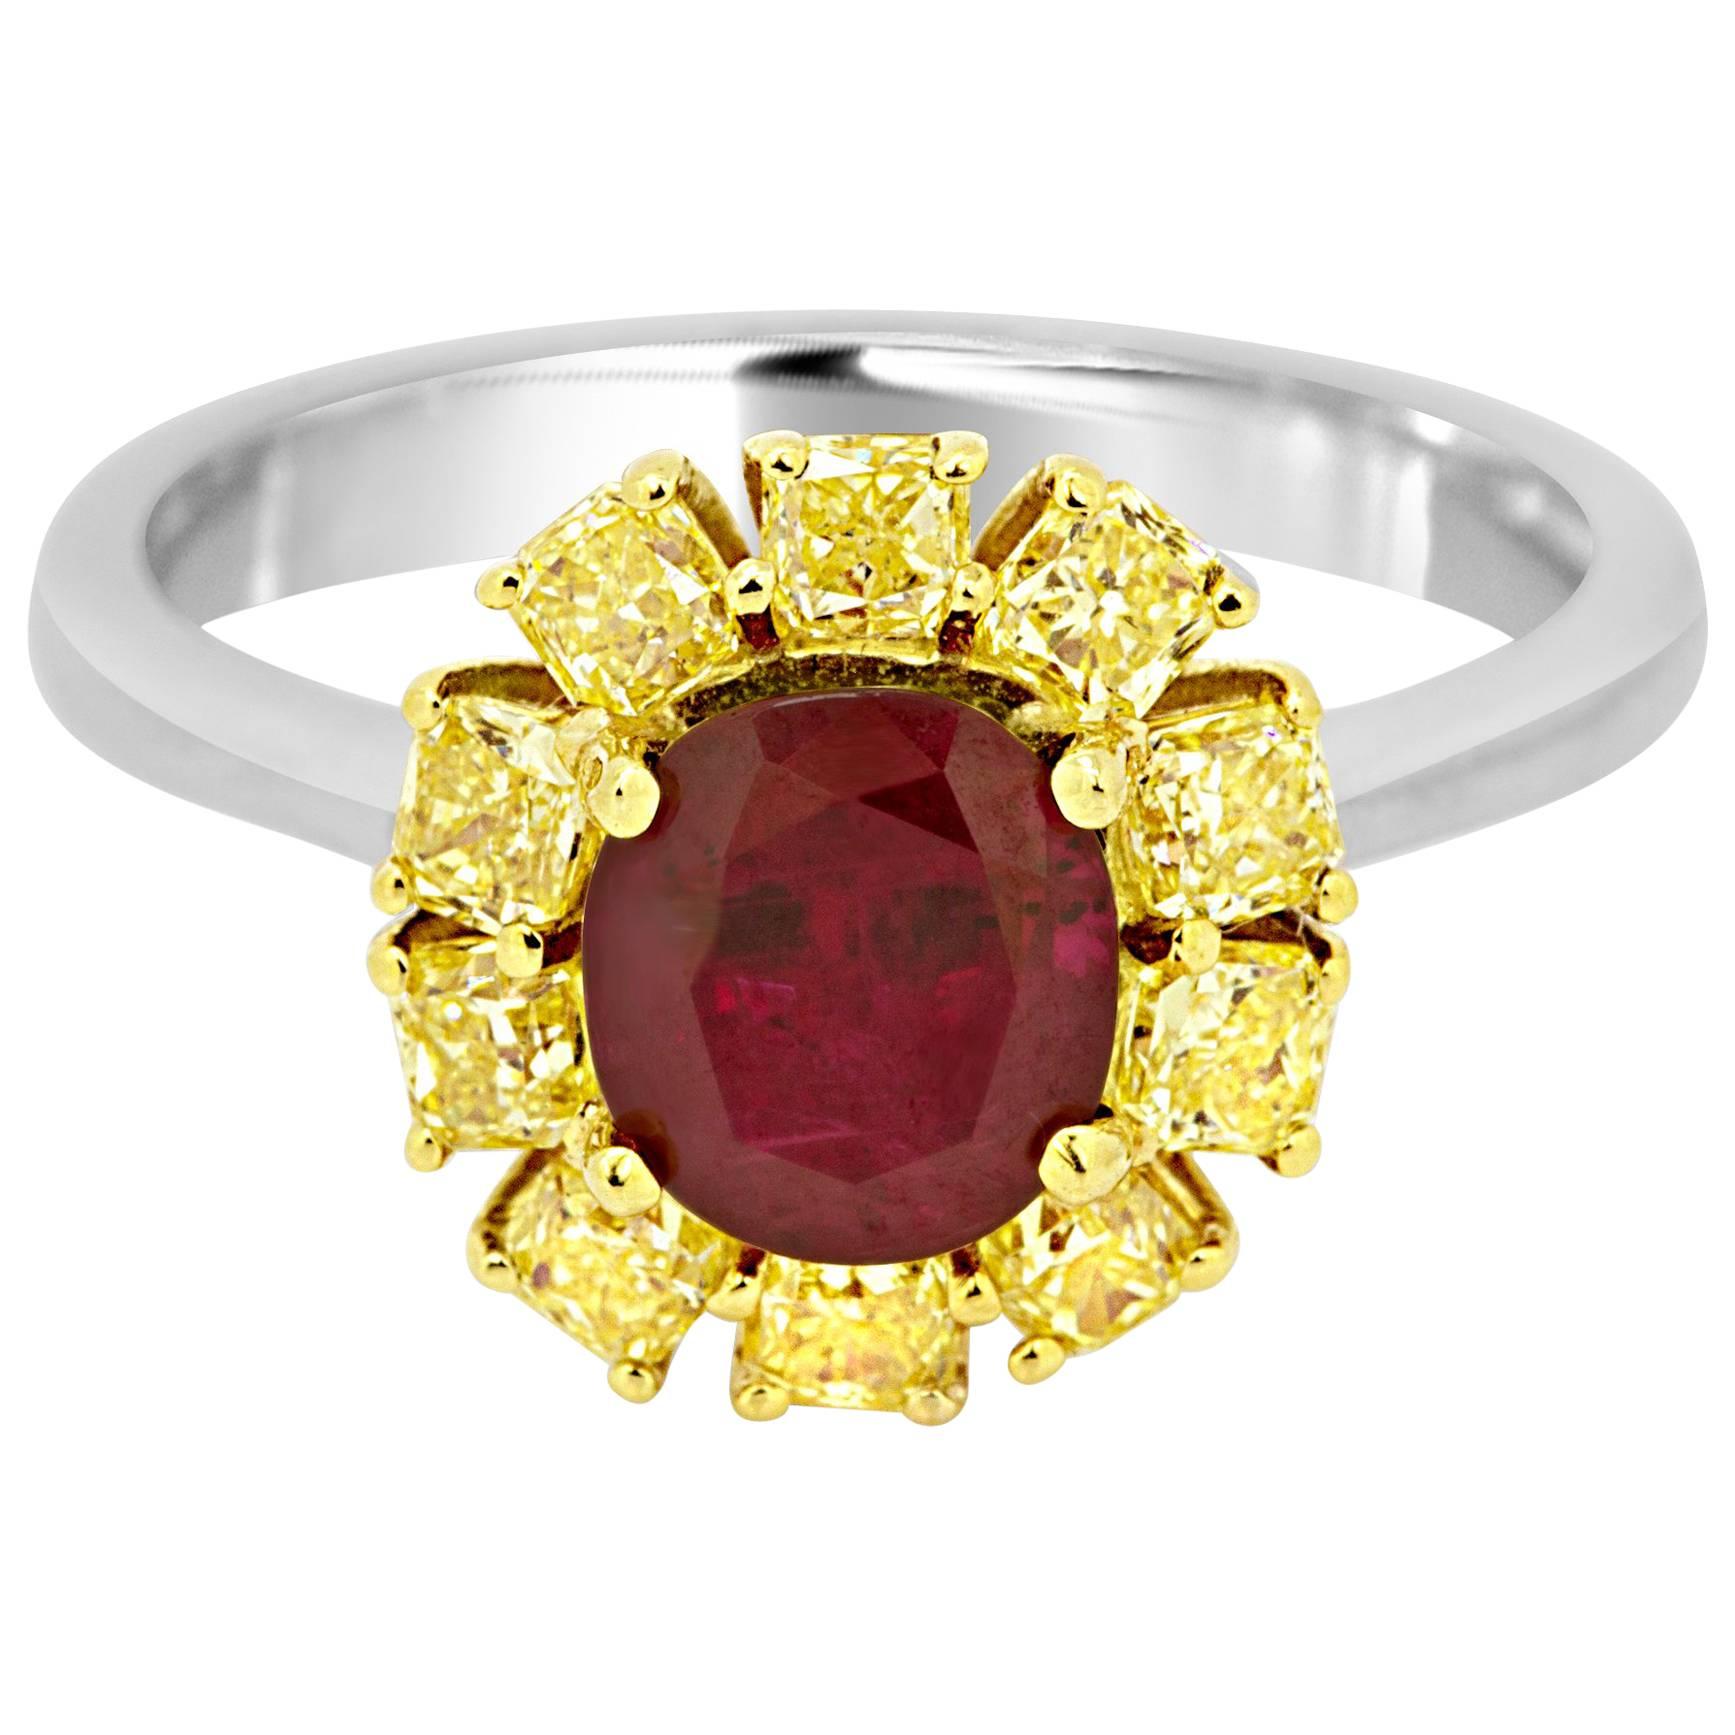 No Heat 1.60 Carat GIA Certified Ruby Diamond Two Color Gold Bridal CocktailRing